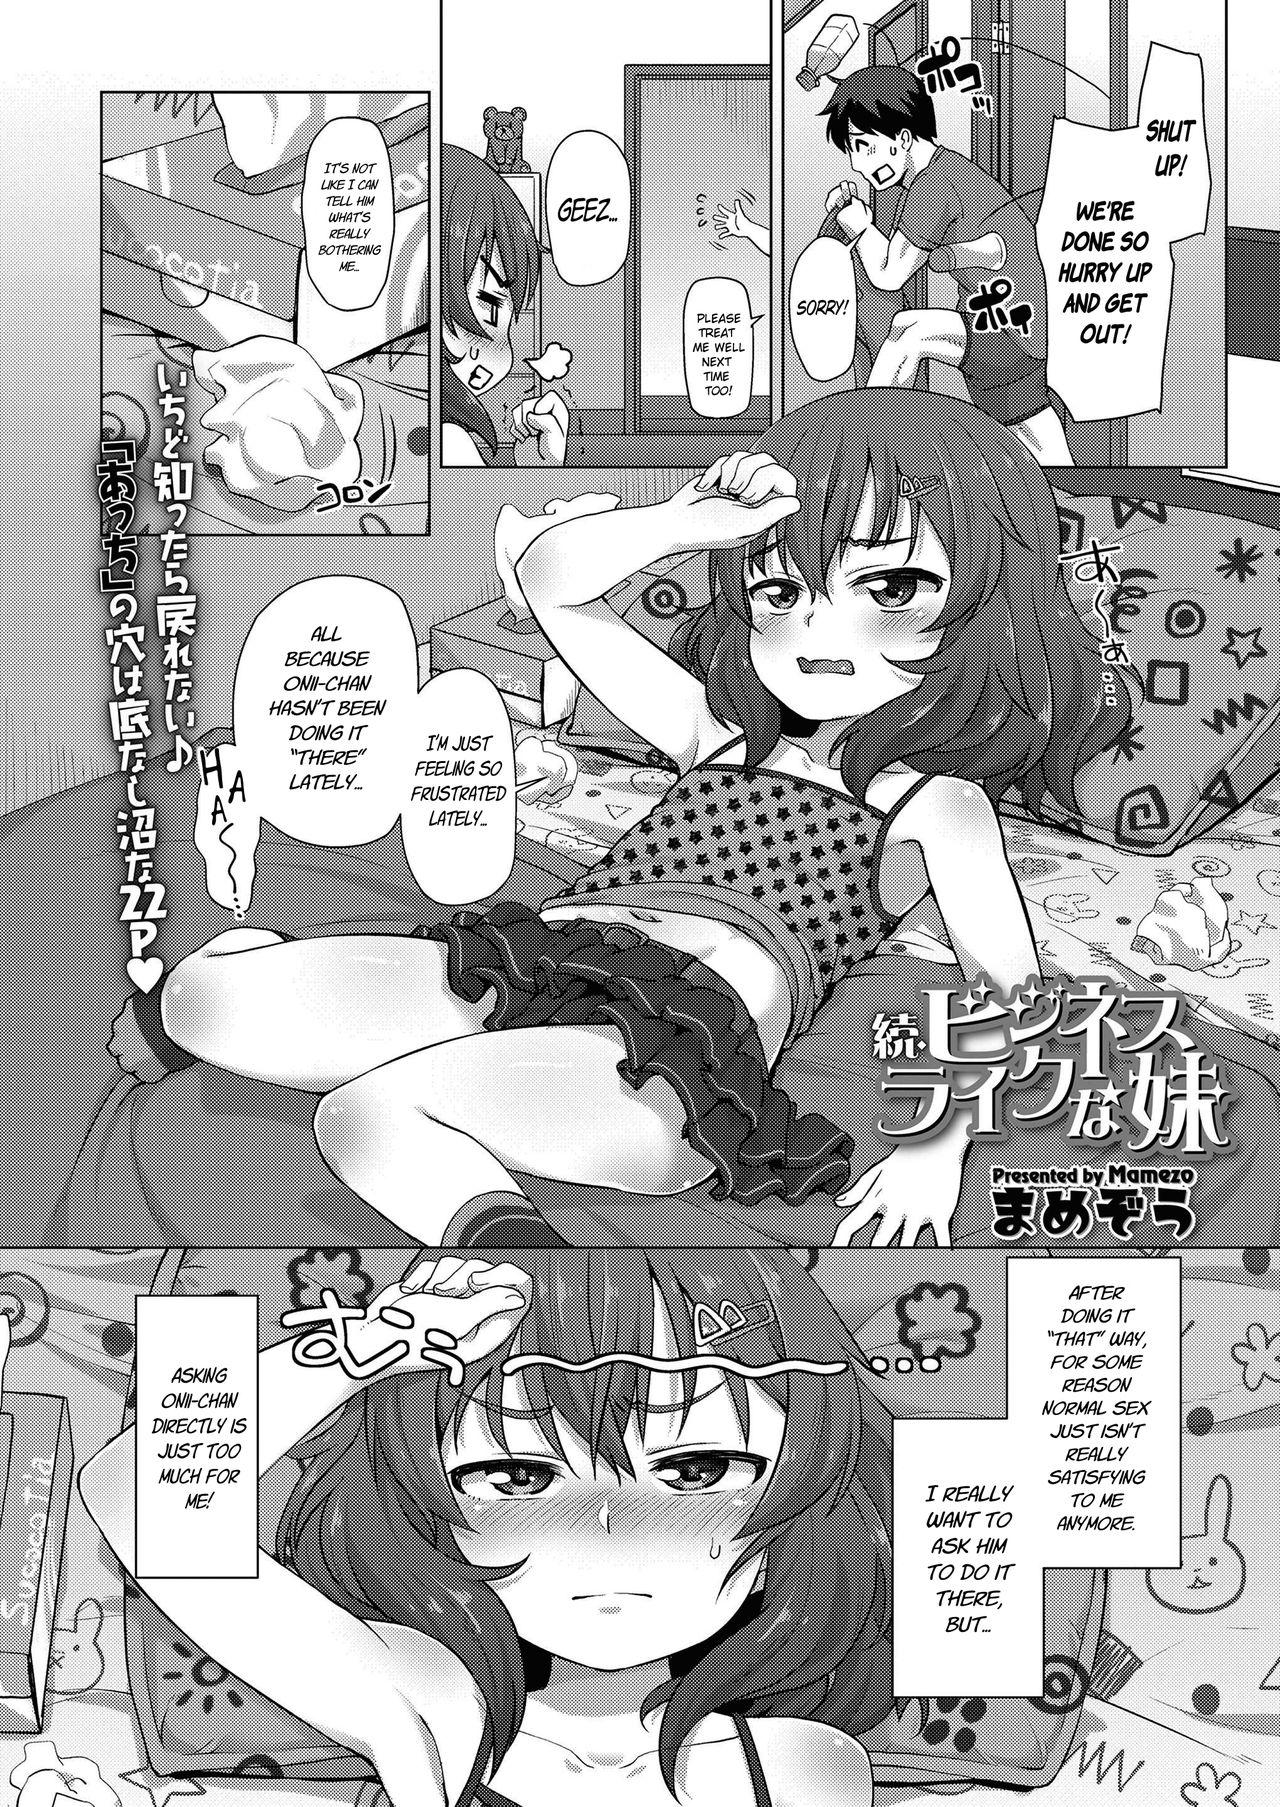 Best Blowjob [Mamezou] Zoku - Business-like na Imouto | Entrepreneurial Little Sister - Sequel (COMIC LO 2019-09) [English] [DMD] Pegging - Page 4